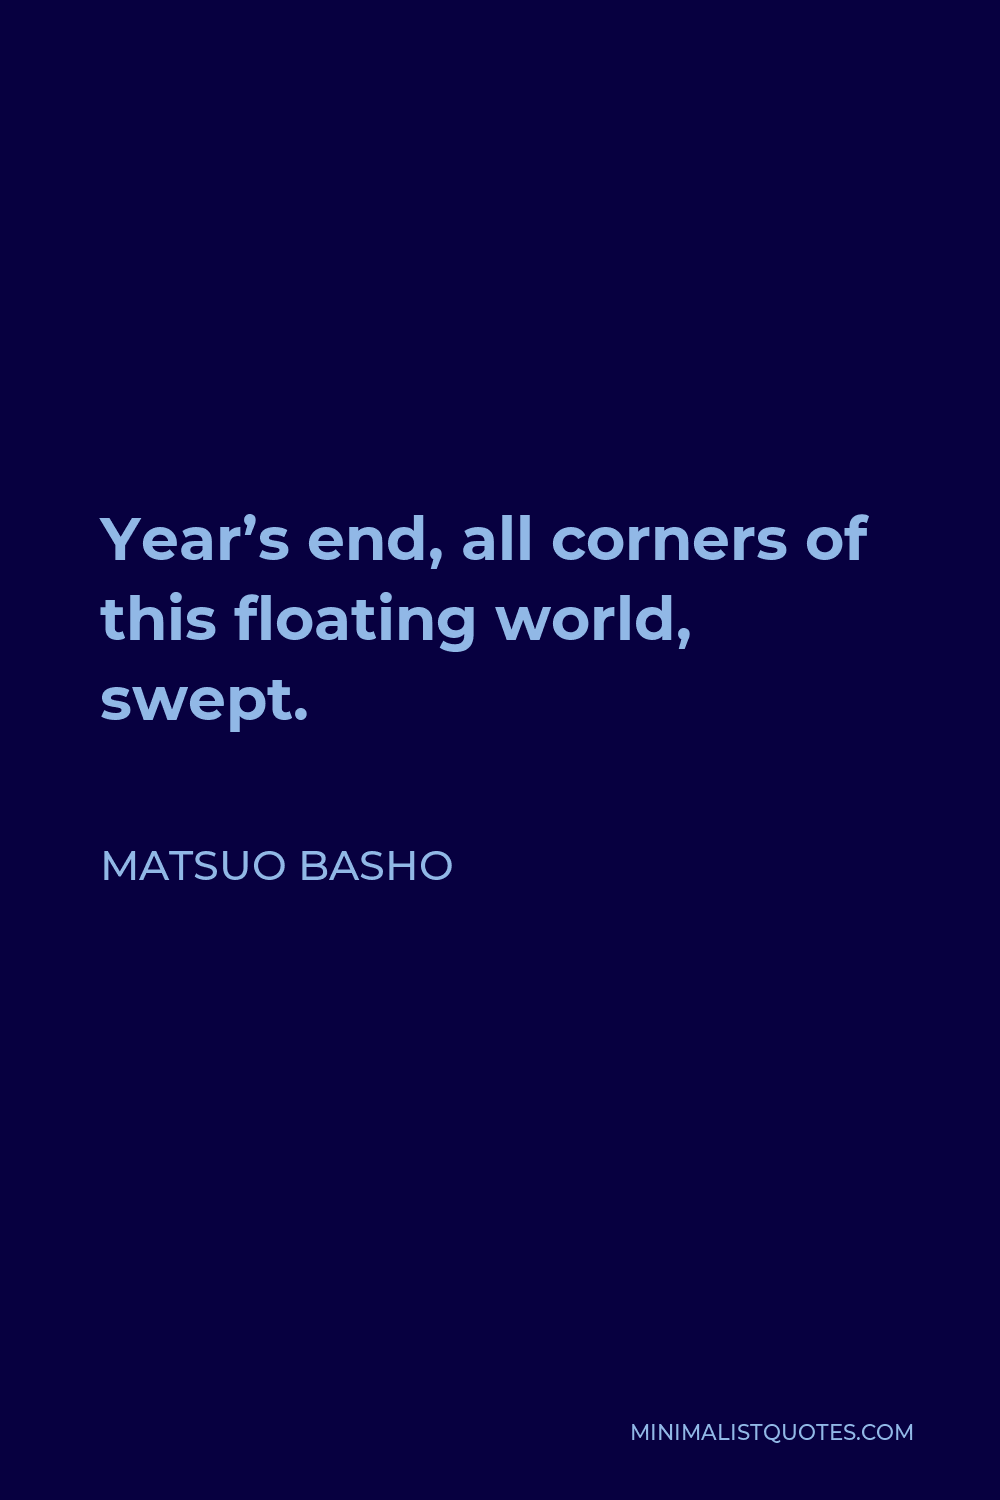 Matsuo Basho Quote - Year’s end, all corners of this floating world, swept.